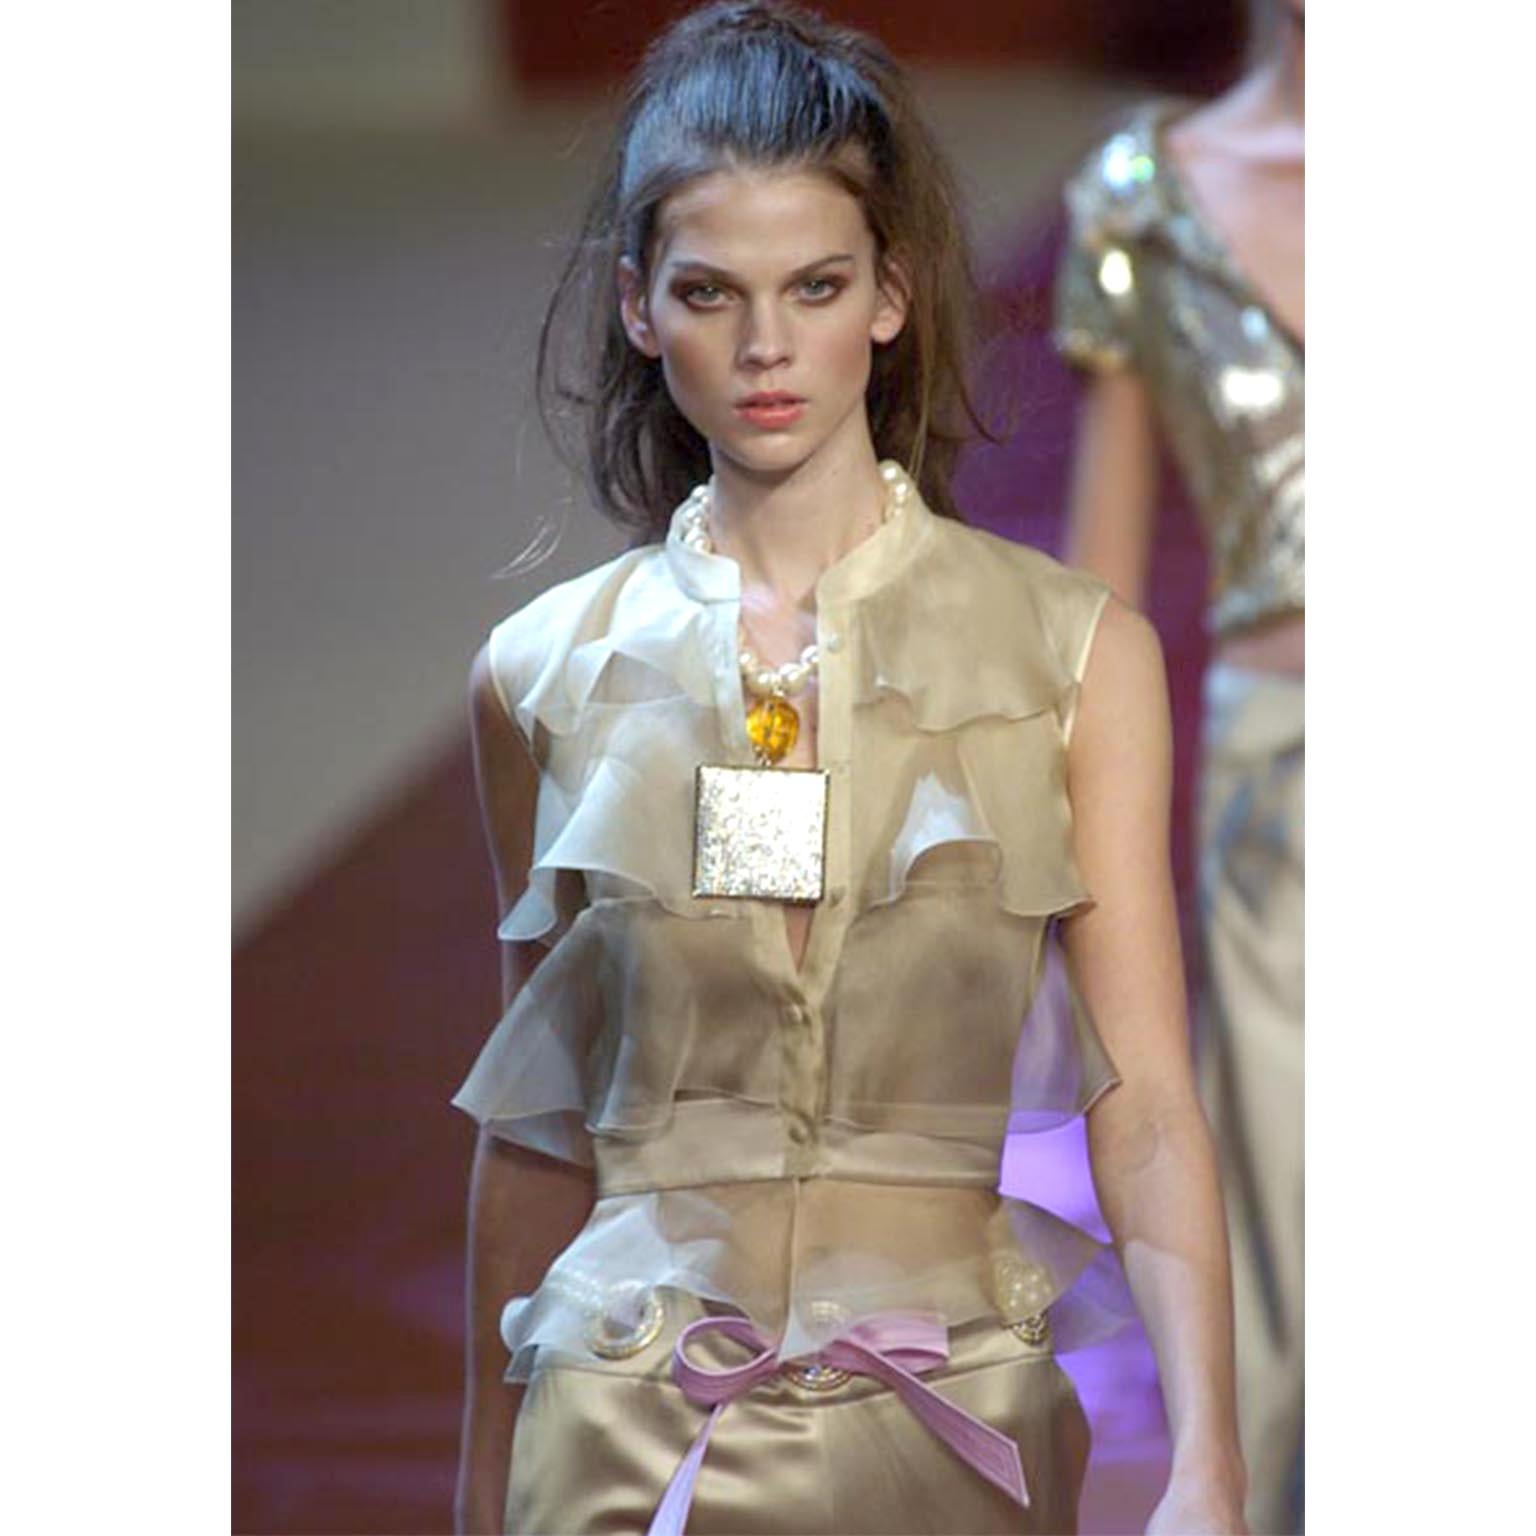 We love Valentino and this elegant top was designed by Valentino Garavani for his S/S 2005 collection. This incredible top was featured on the runway in a variety of colors and we have it in 3 different shades as well. We currently have a green one